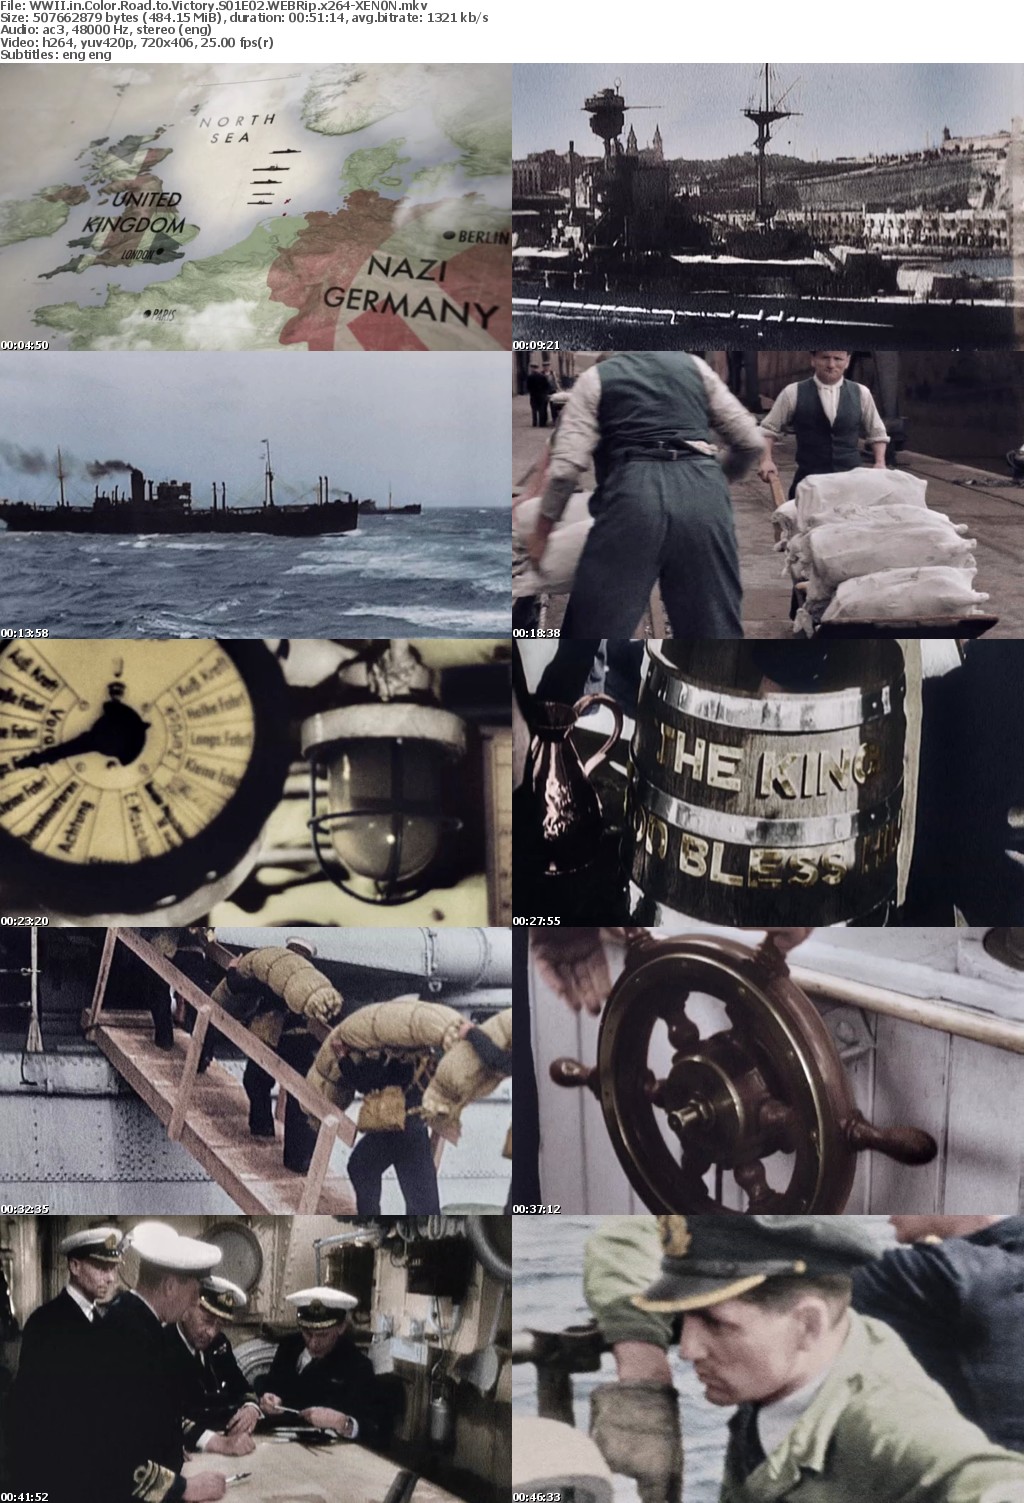 WWII in Color Road to Victory S01E02 WEBRip x264-XEN0N